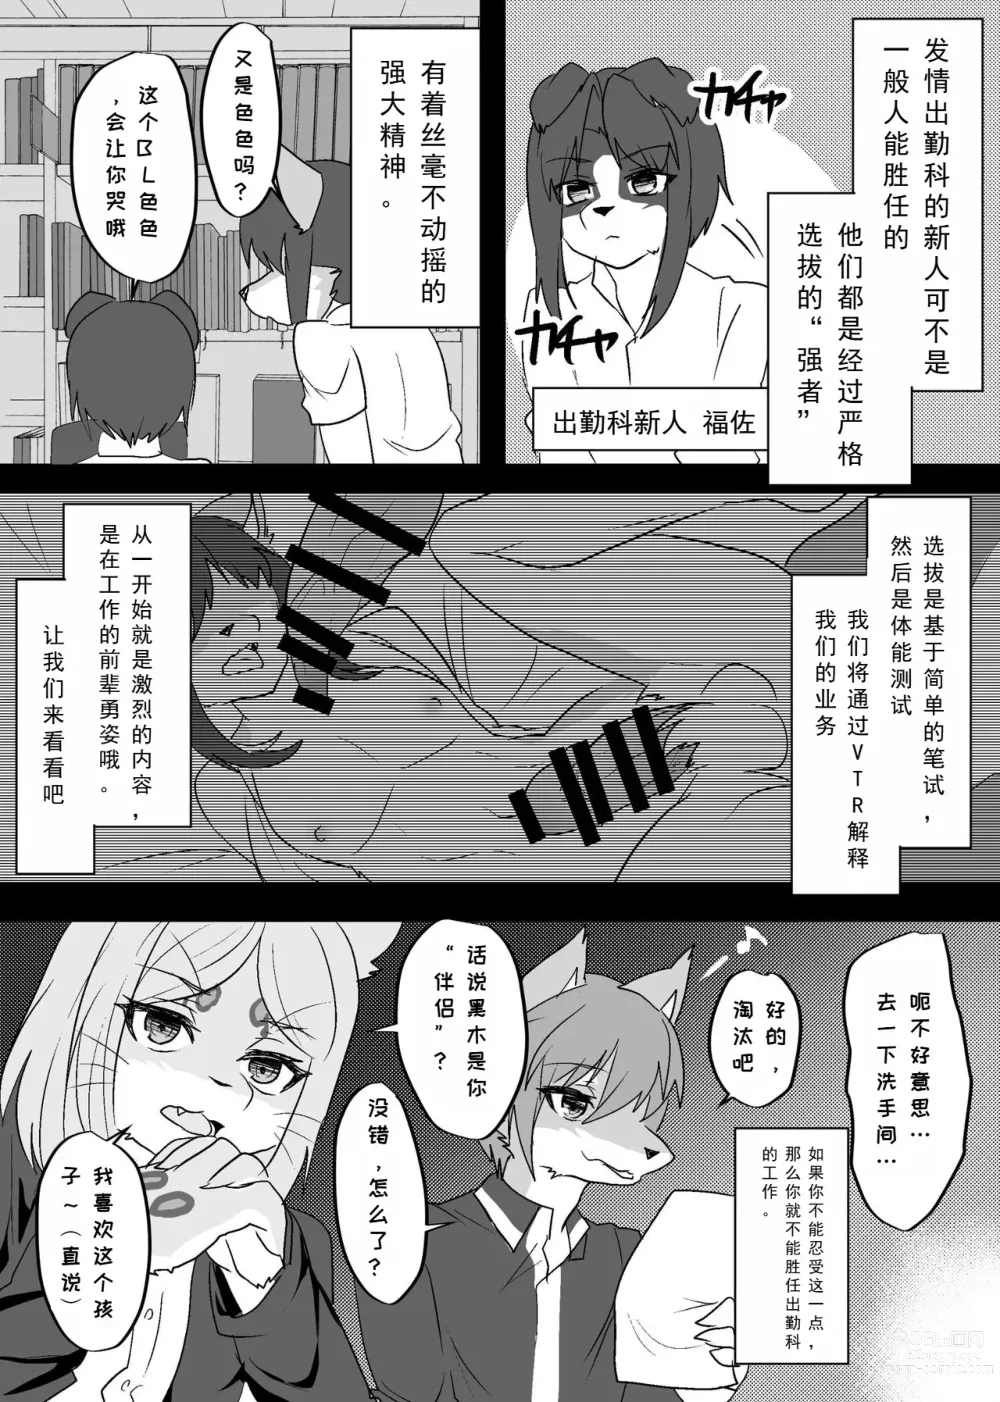 Page 3 of doujinshi 我们发情出勤科 2